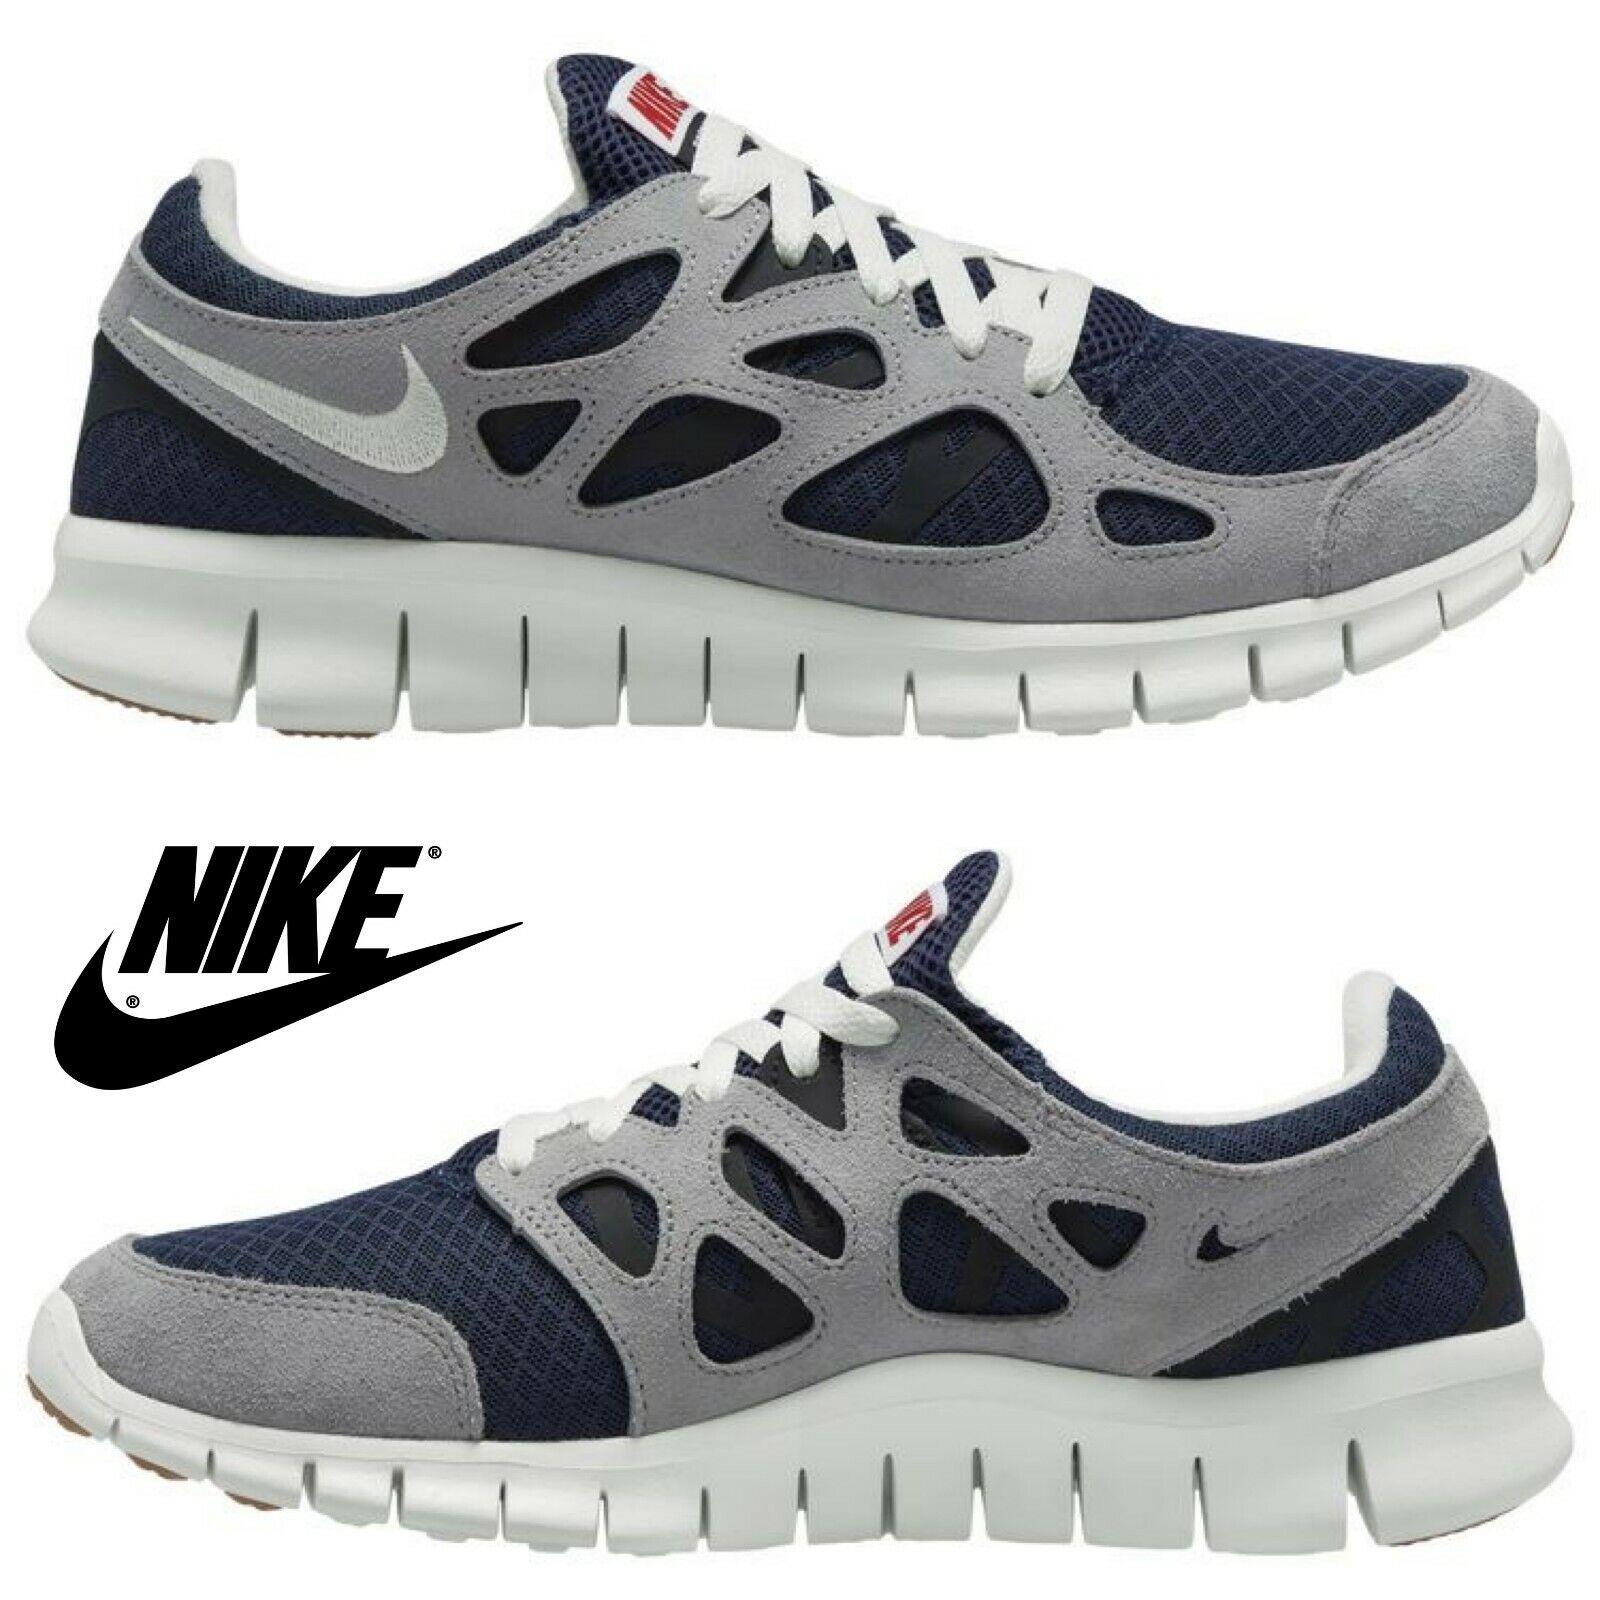 Nike Men`s Free Run 2 Shoes Running Training Athletic Sport Casual Sneakers Navy - Blue , Navy/White/Black Manufacturer